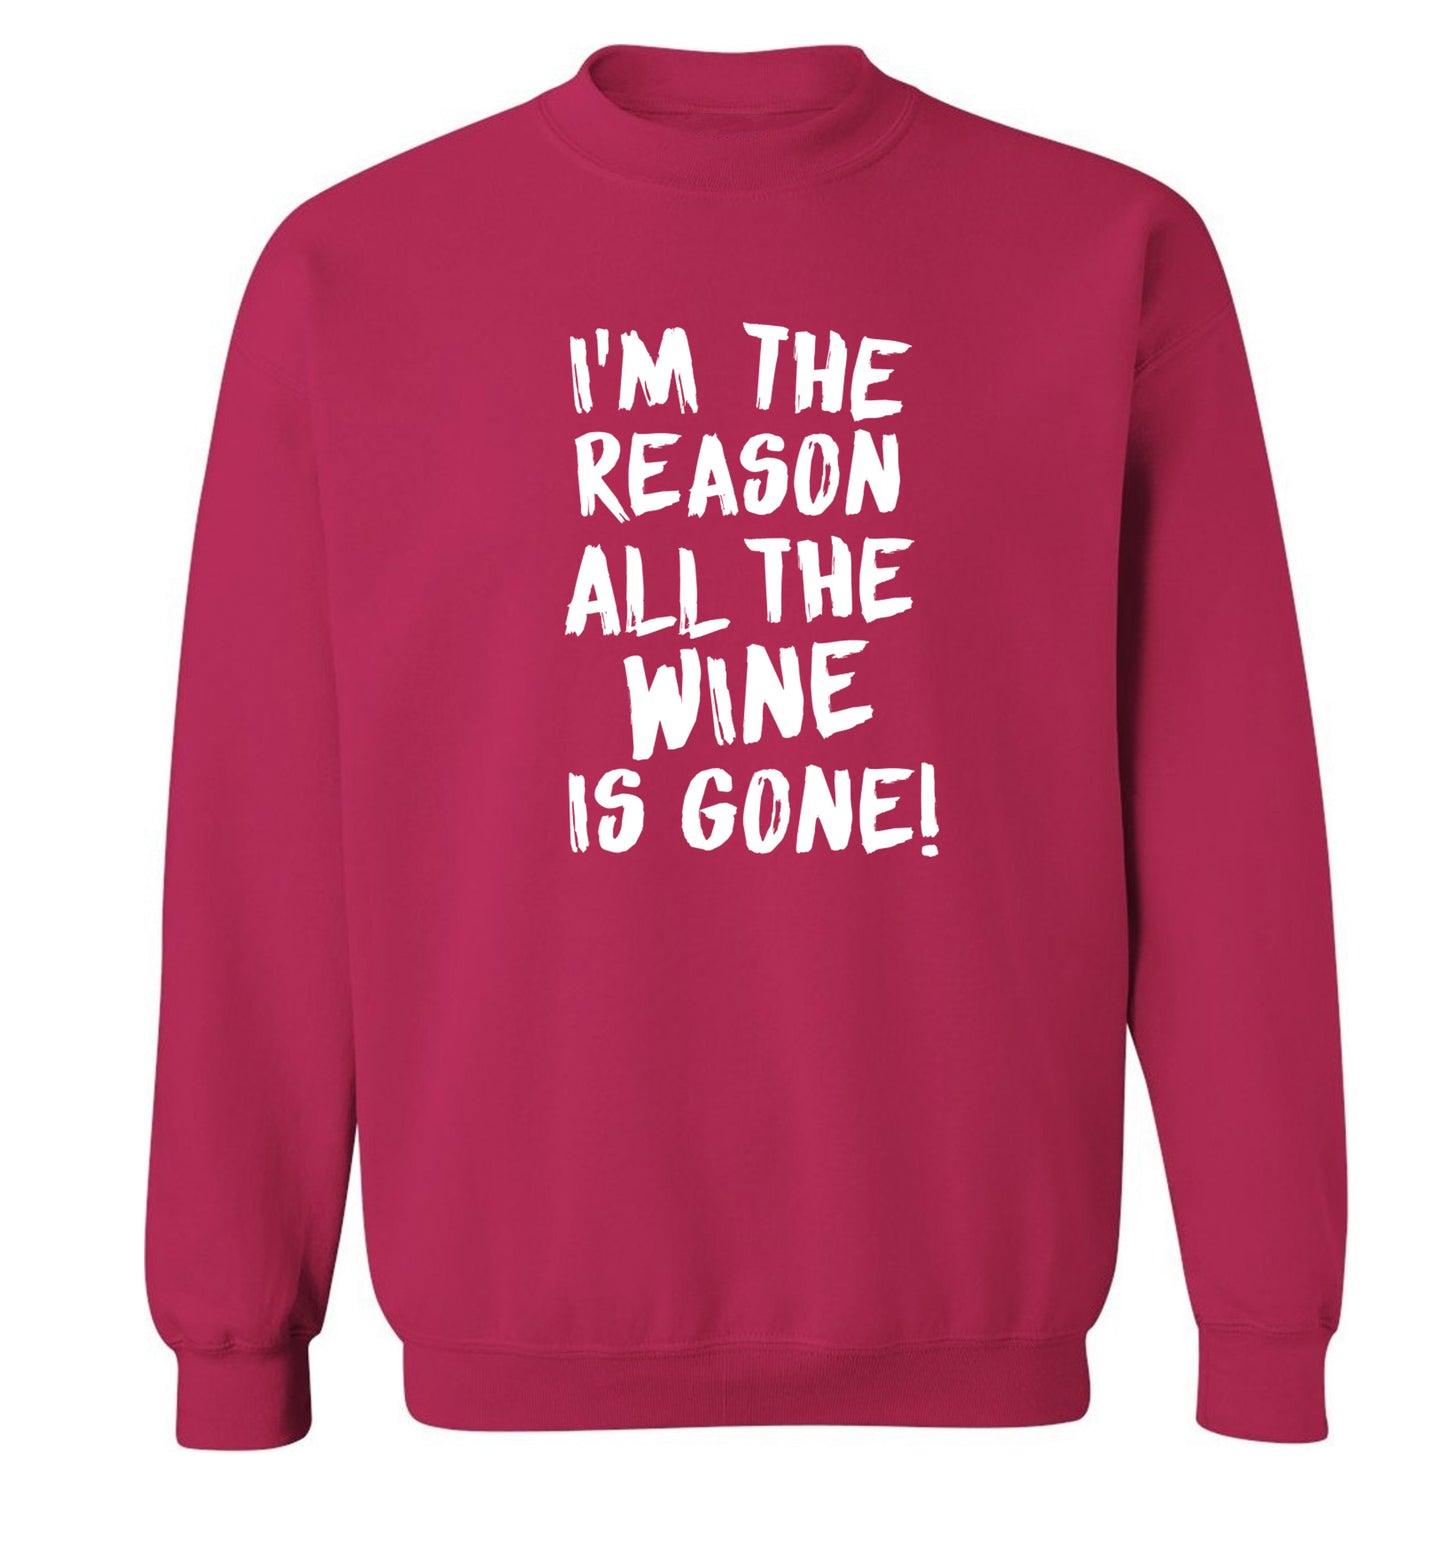 I'm the reason all the wine is gone Adult's unisex pink Sweater 2XL